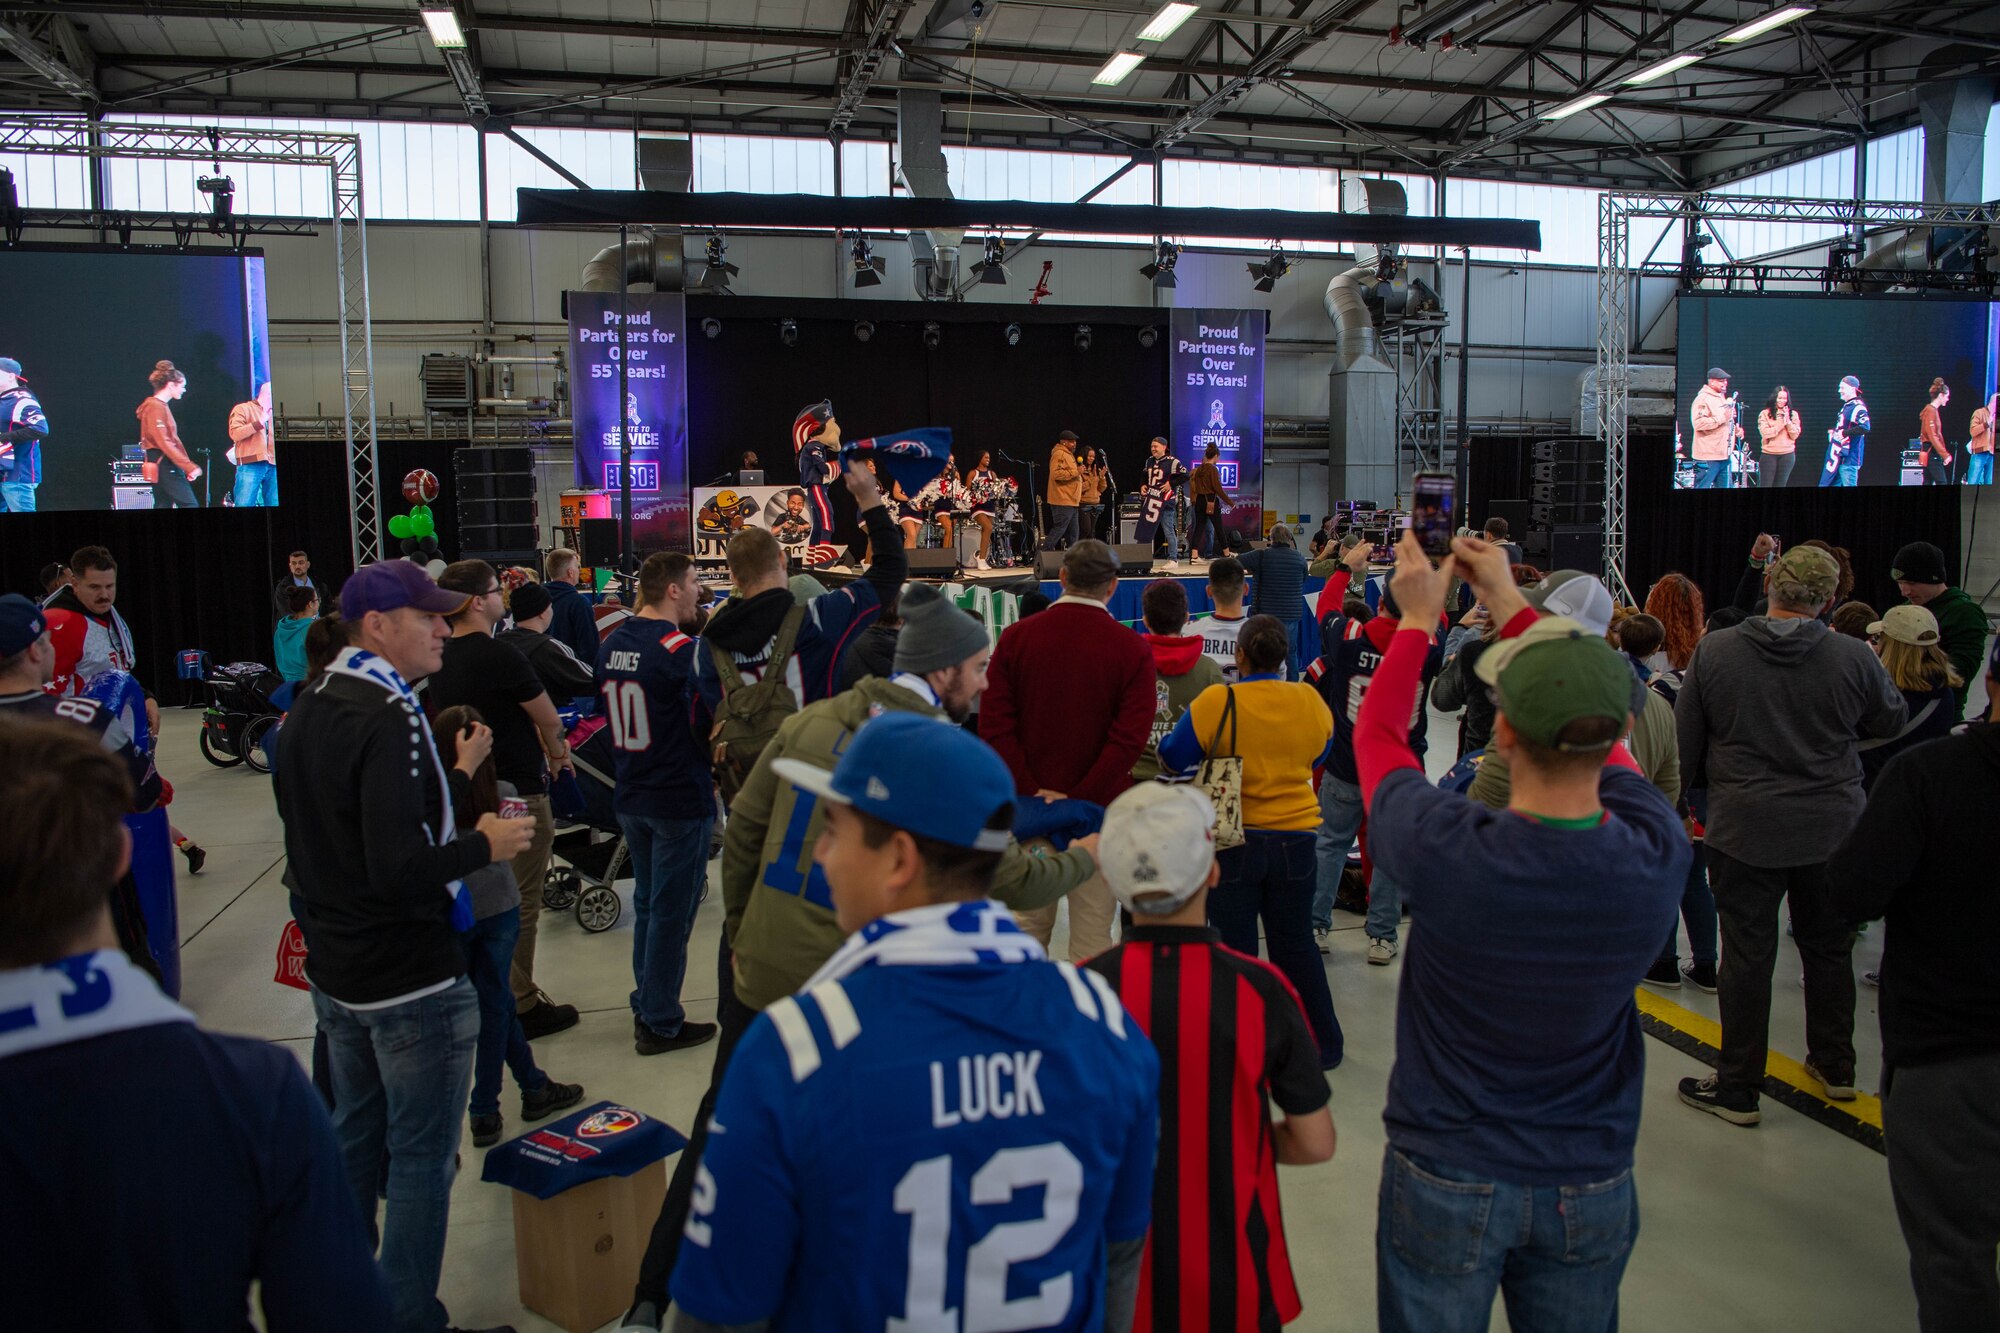 U.S. Air Force Airmen from the 86th Security Forces Squadron, and Kaiserslautern Military Community members dance during a tailgate event at Ramstein Air Base, Germany, Nov. 11, 2023.